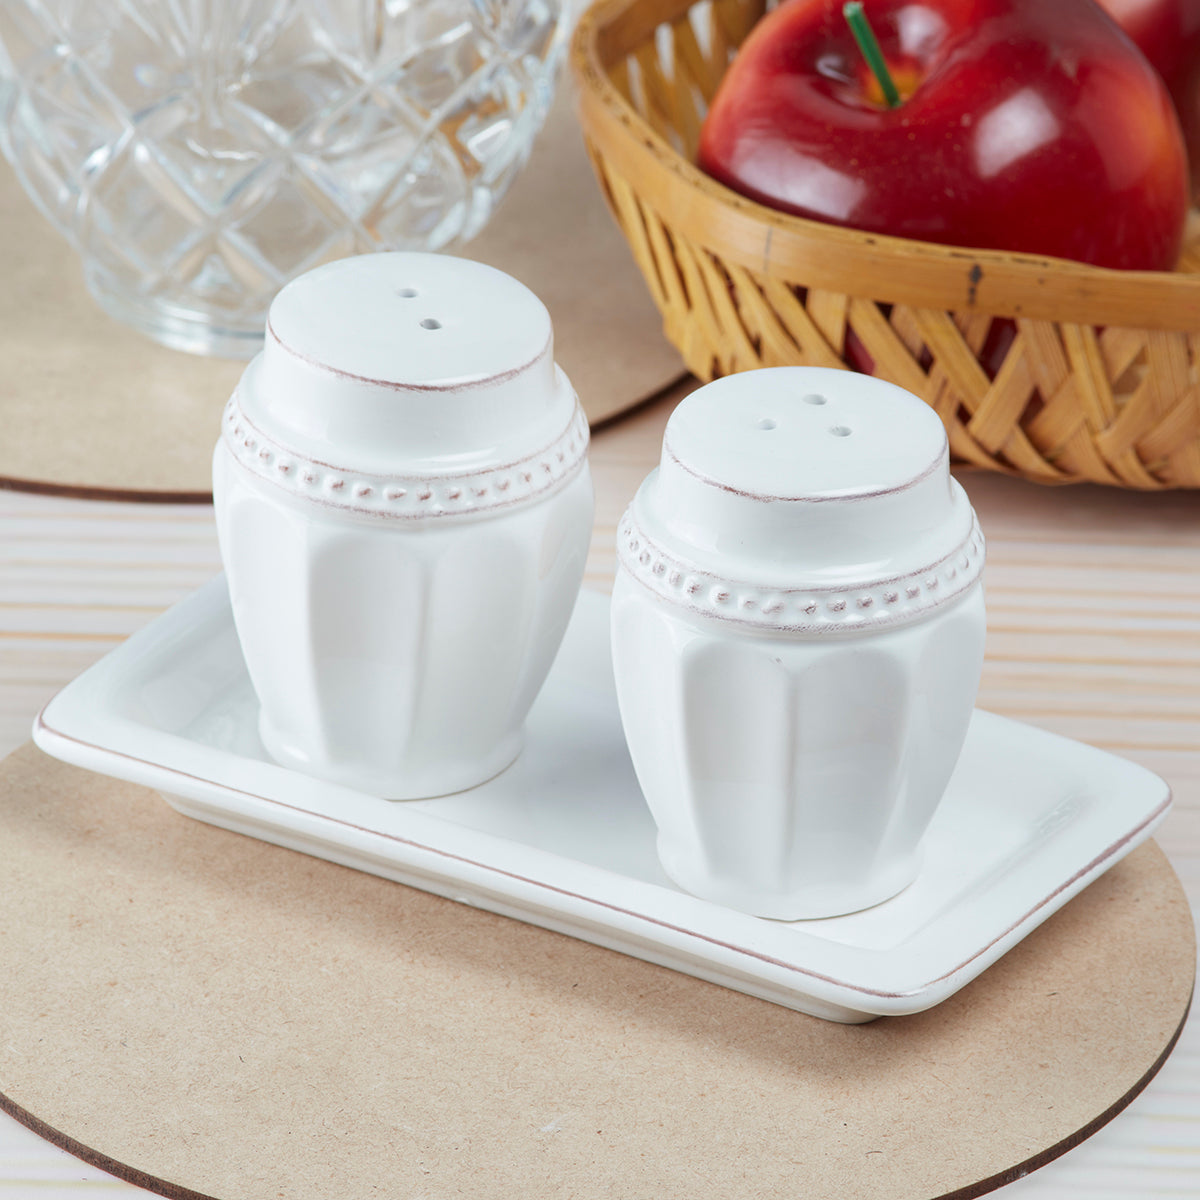 Ceramic Salt and Pepper Shakers Set with tray for Dining Table (10656)